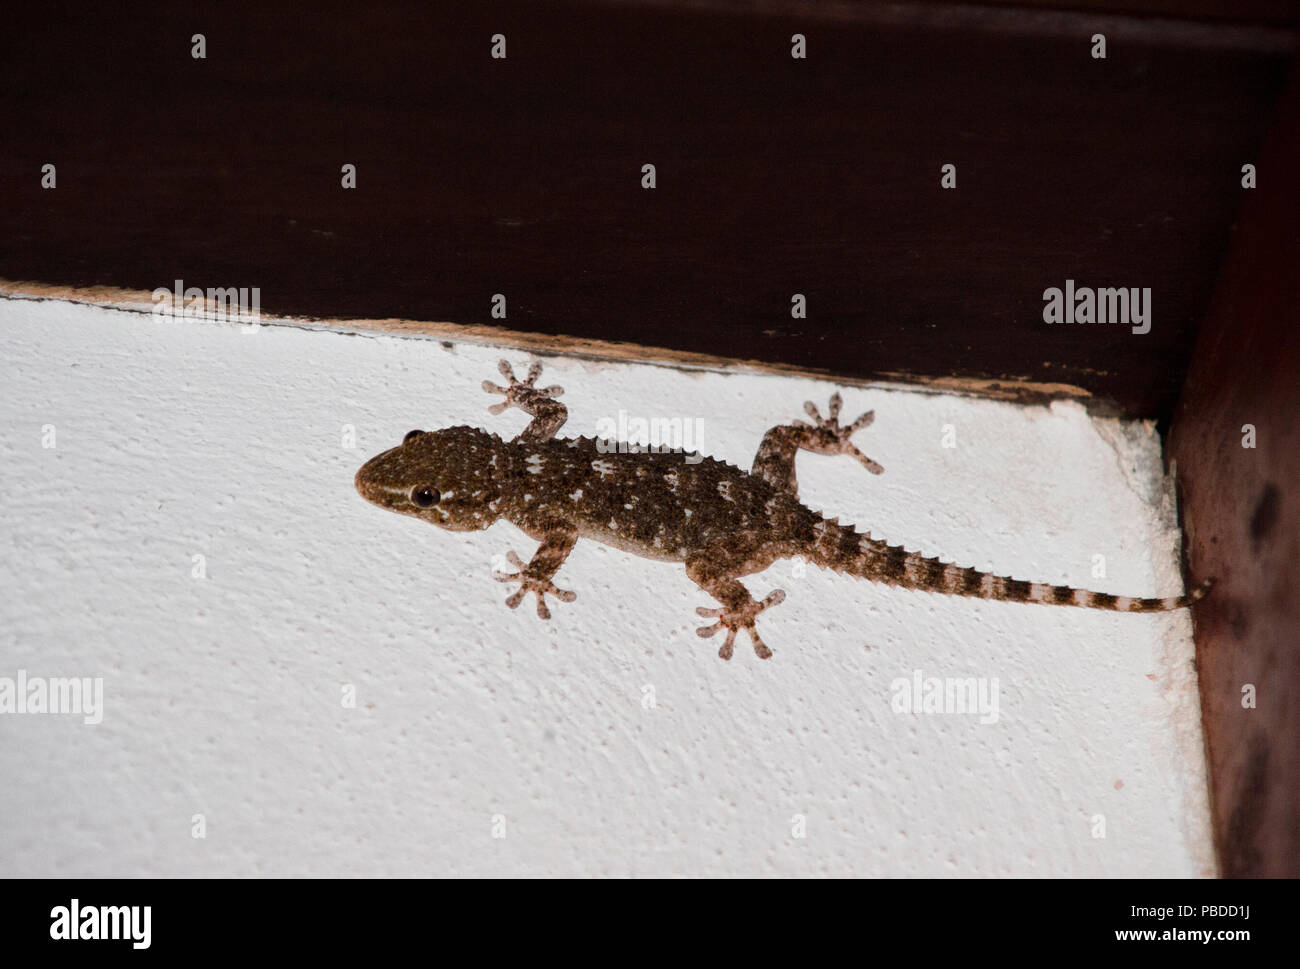 Moorish Wall Gecko,(Tarentola mauritanica), also known as Common Wall Gecko, hunting insects on wall, Ibiza, Balearic Islands, Spain Stock Photo